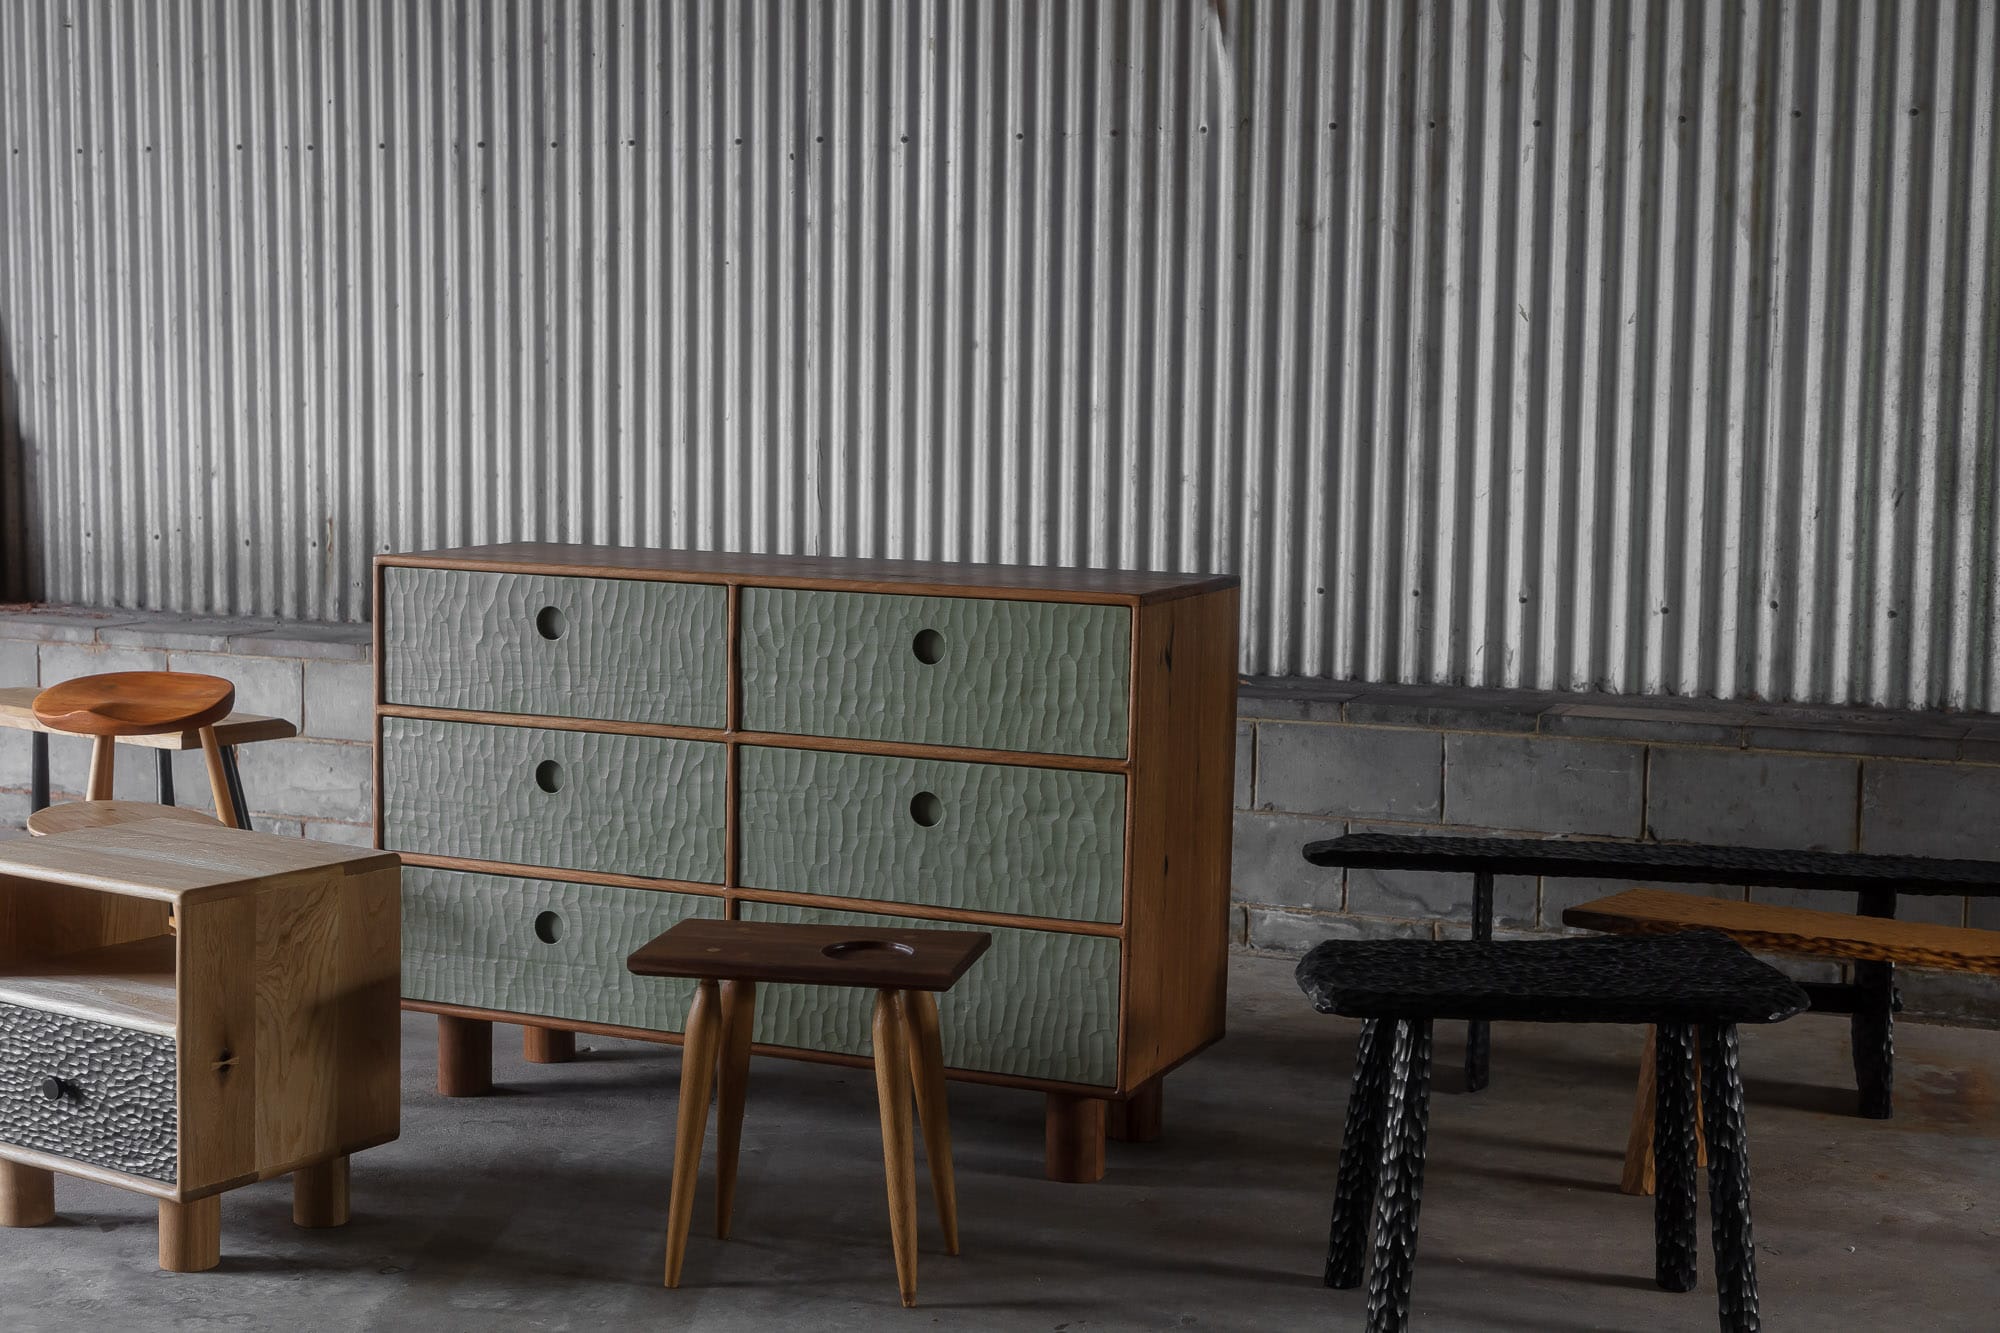 A collection shot of Two Blue Boys Furniture in the warehouse including stools, sideboards and bedside tables